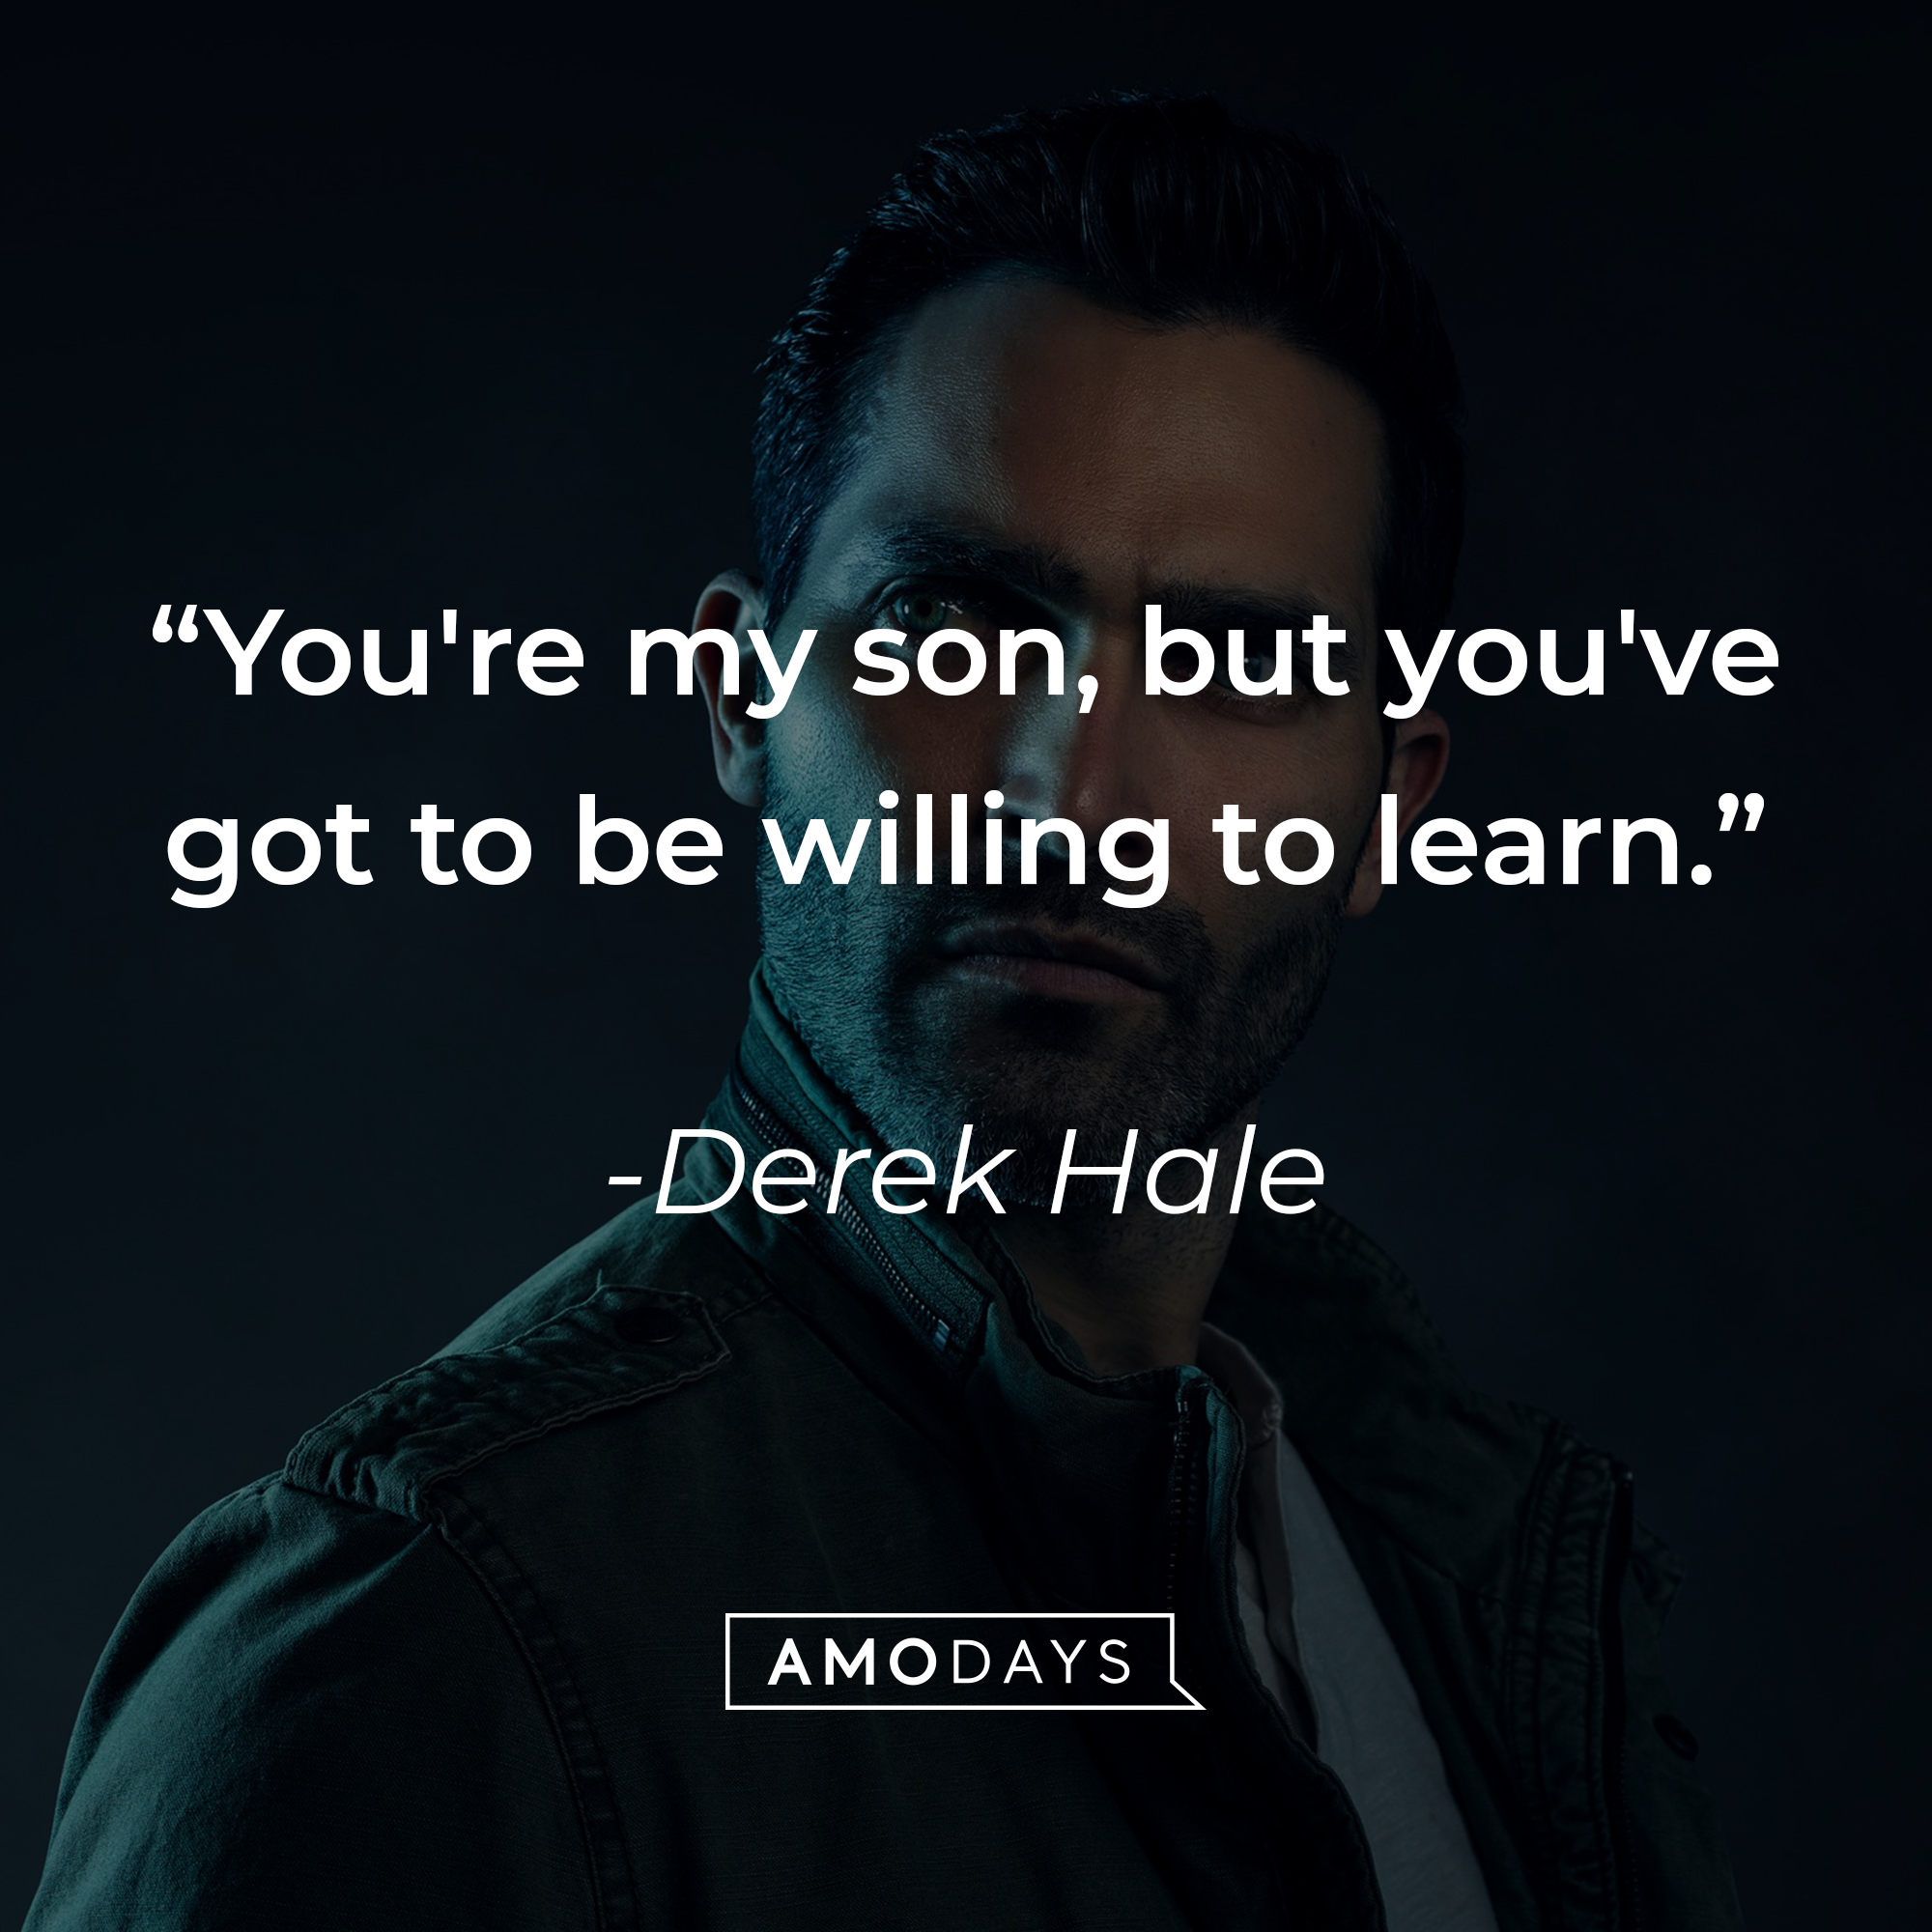 Derek Hale, with his quote: “You're my son, but you've got to be willing to learn." | Source: Amodays